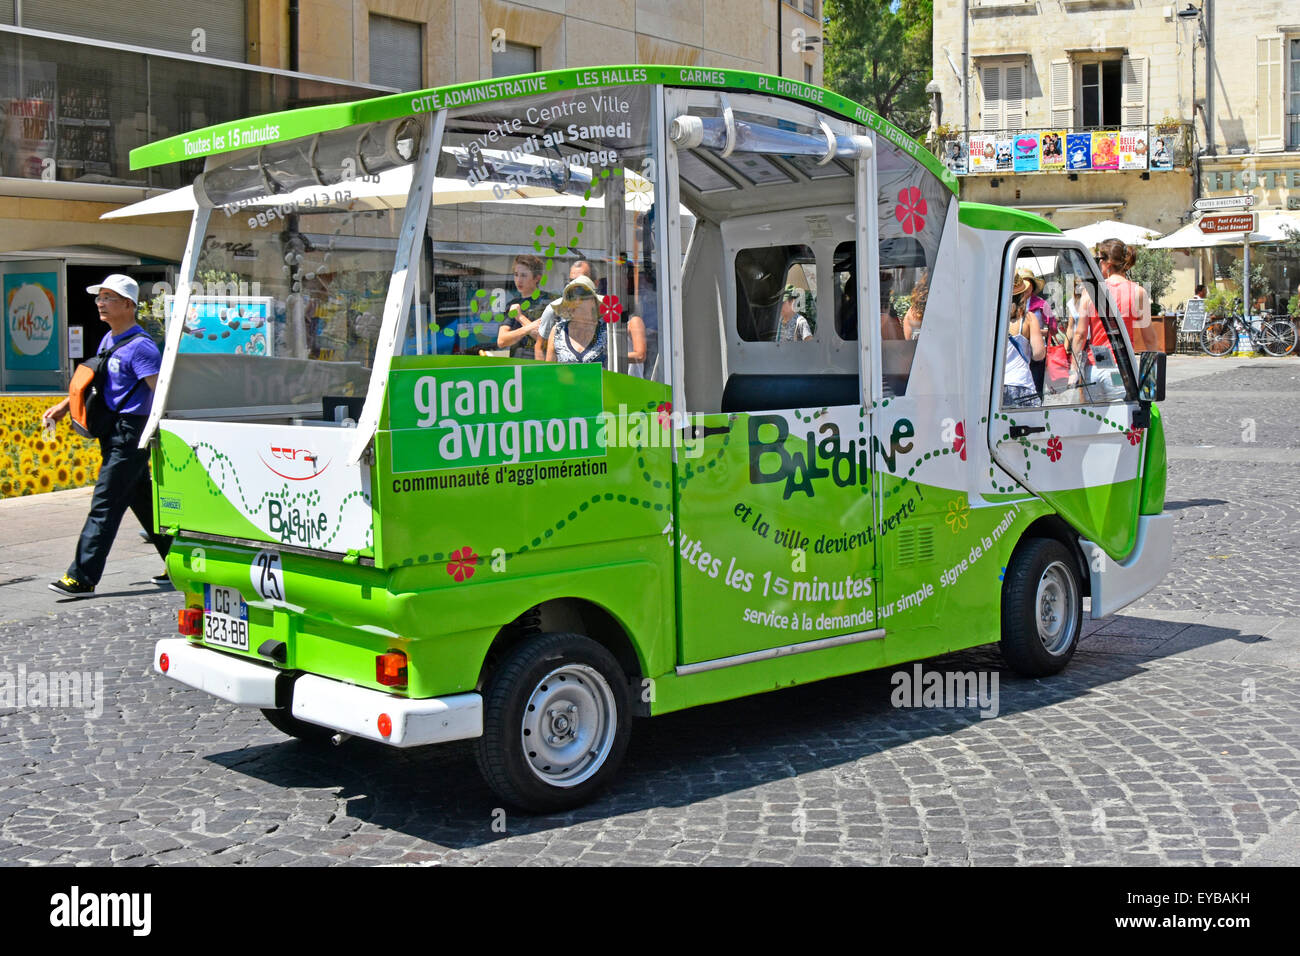 Avignon France public transport cross between small buses & a taxi Baladines are little 7 seat electric vehicles on a circular route in city centre Stock Photo